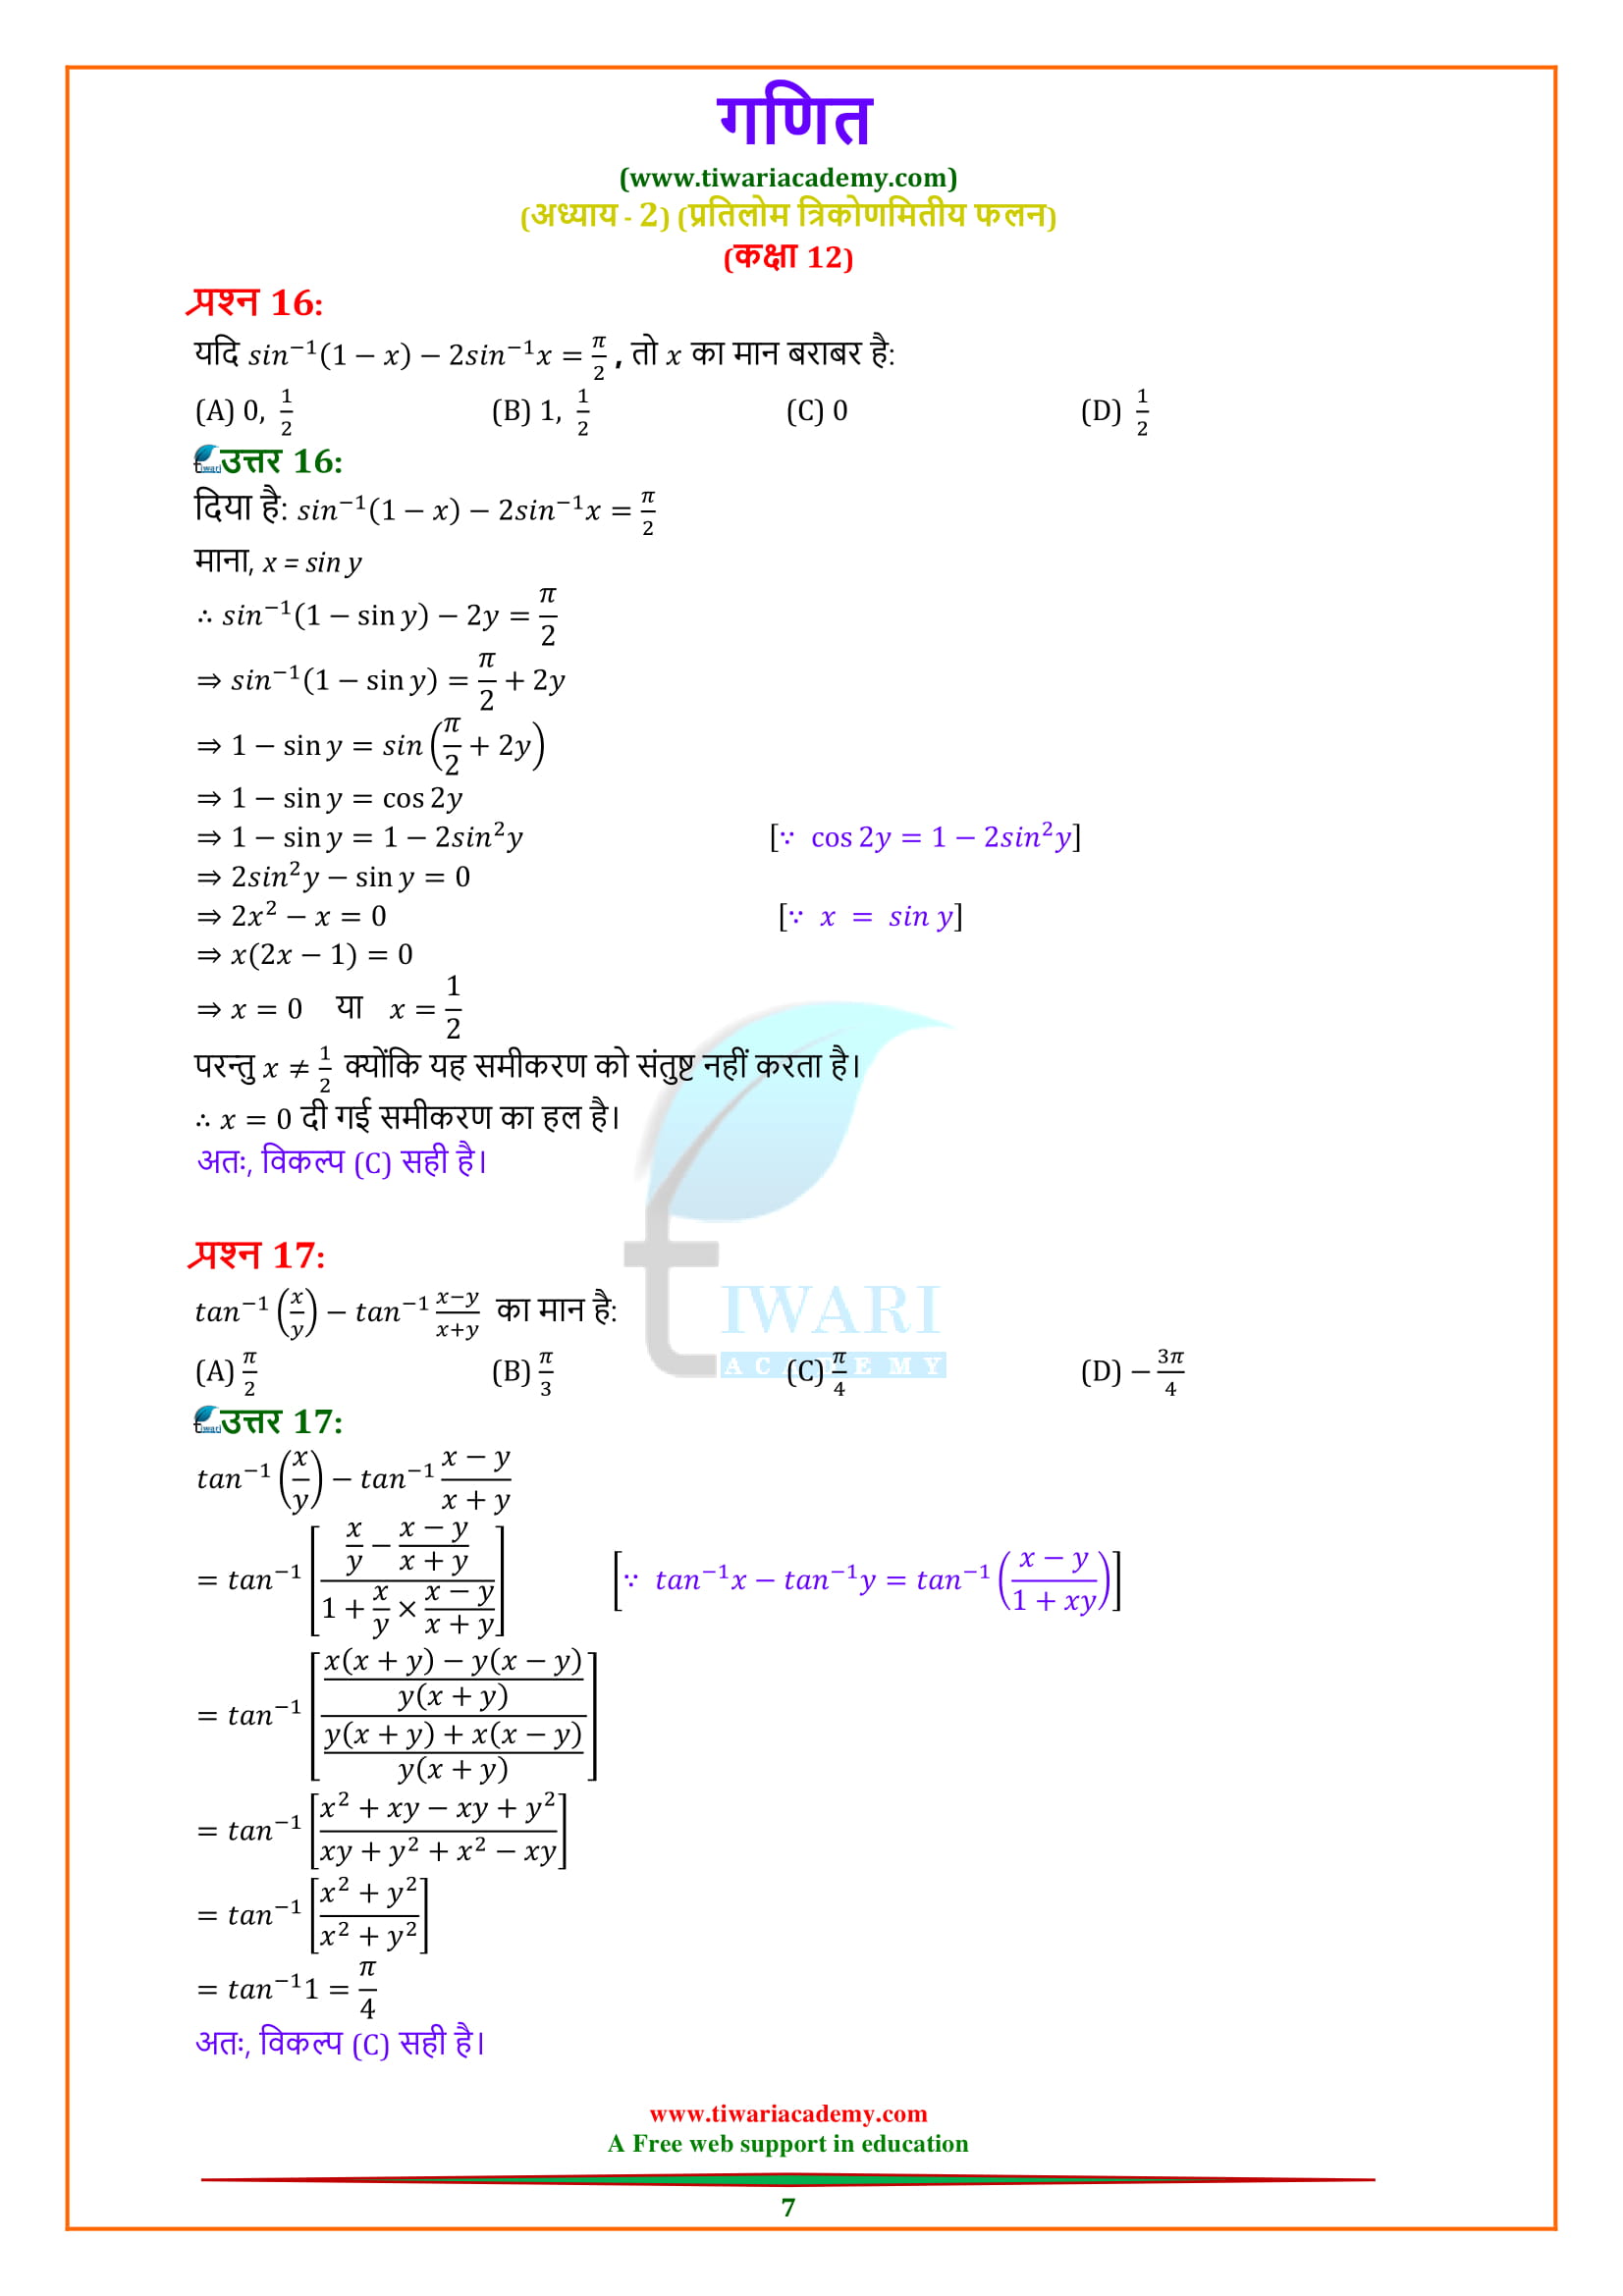 12 Maths Miscellaneous Exercise 2 Solutions full guide in hindi